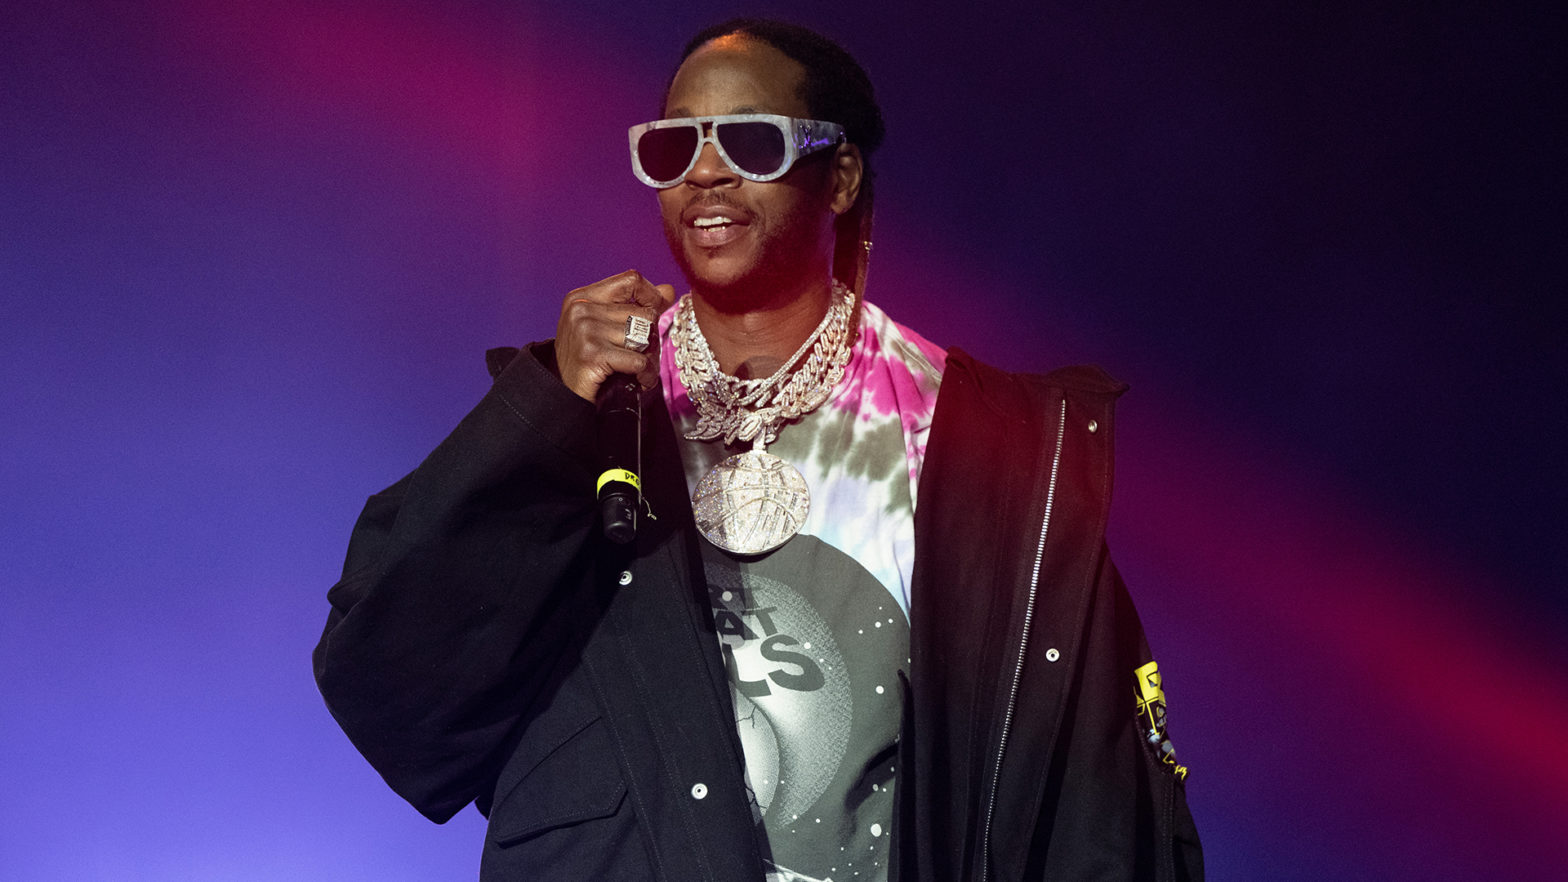 After Buying Property For $500K For His Atlanta Business, 2 Chainz Says He's 'Doubled Or Tripled' His Investment